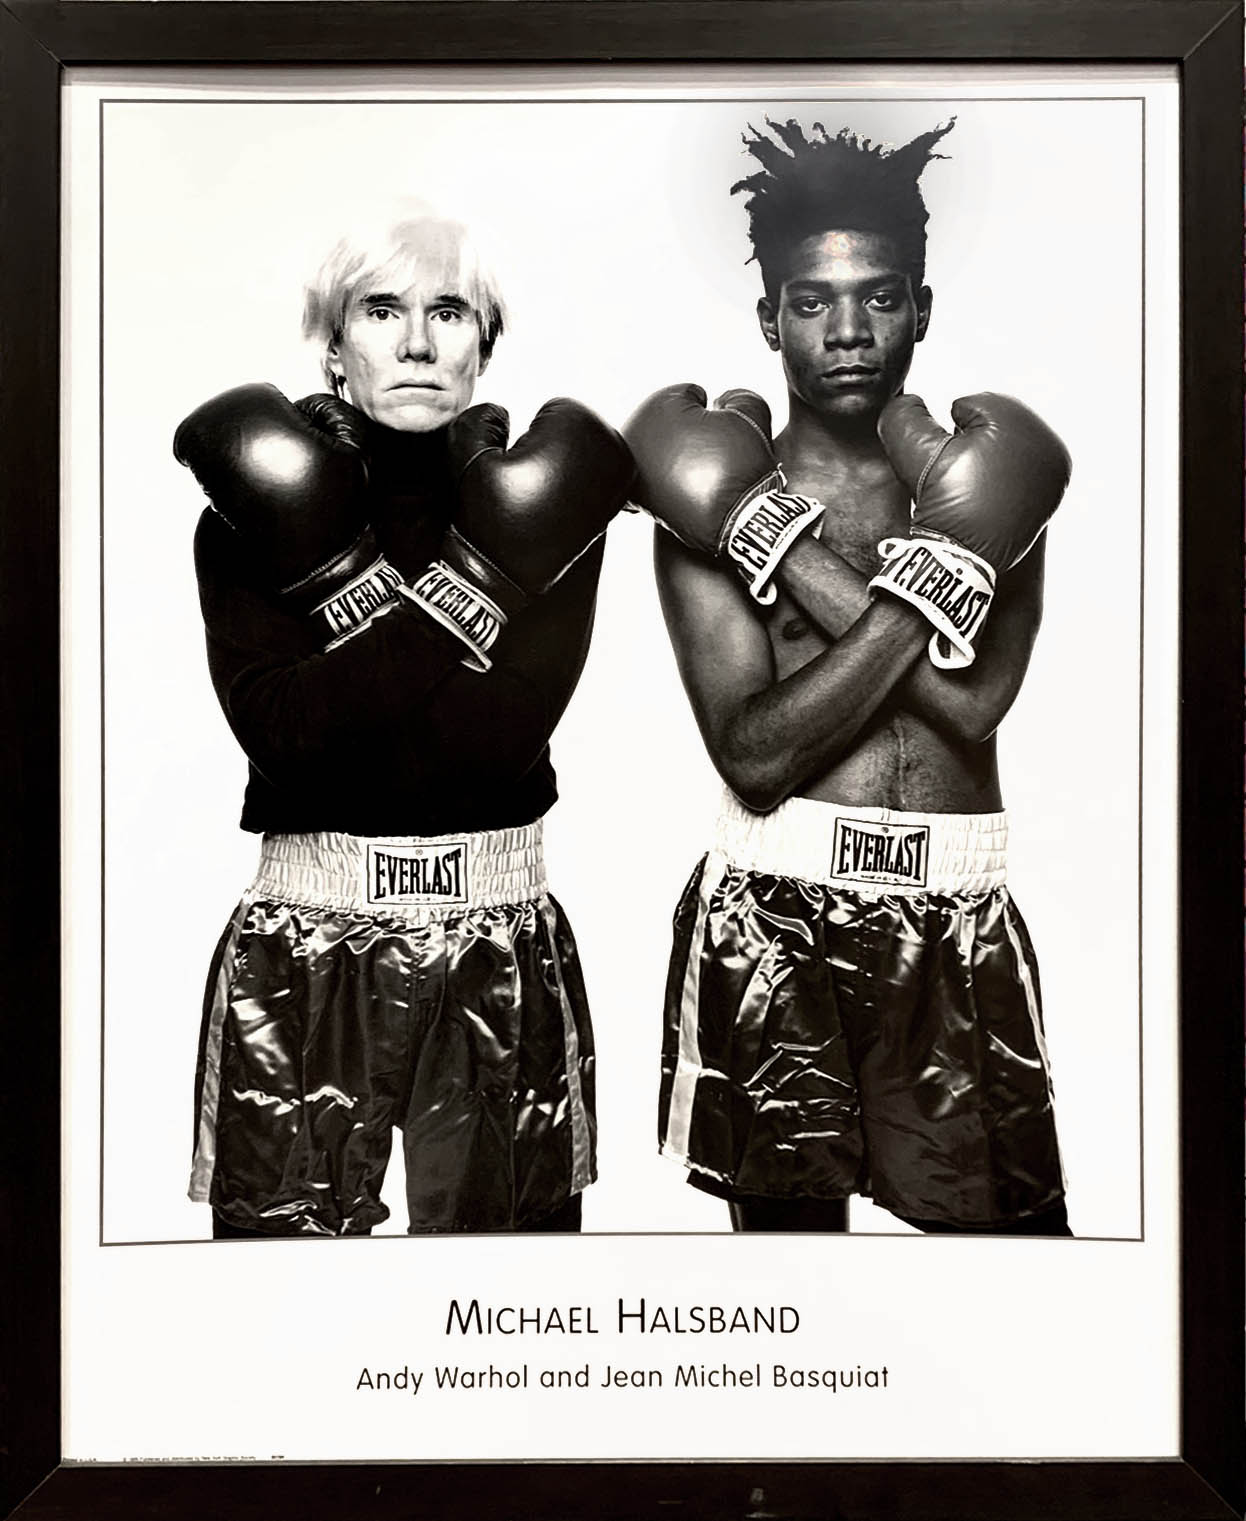 「Andy Warhol and Jean Michel Basquiat Poster / Michael Halsband」メイン画像